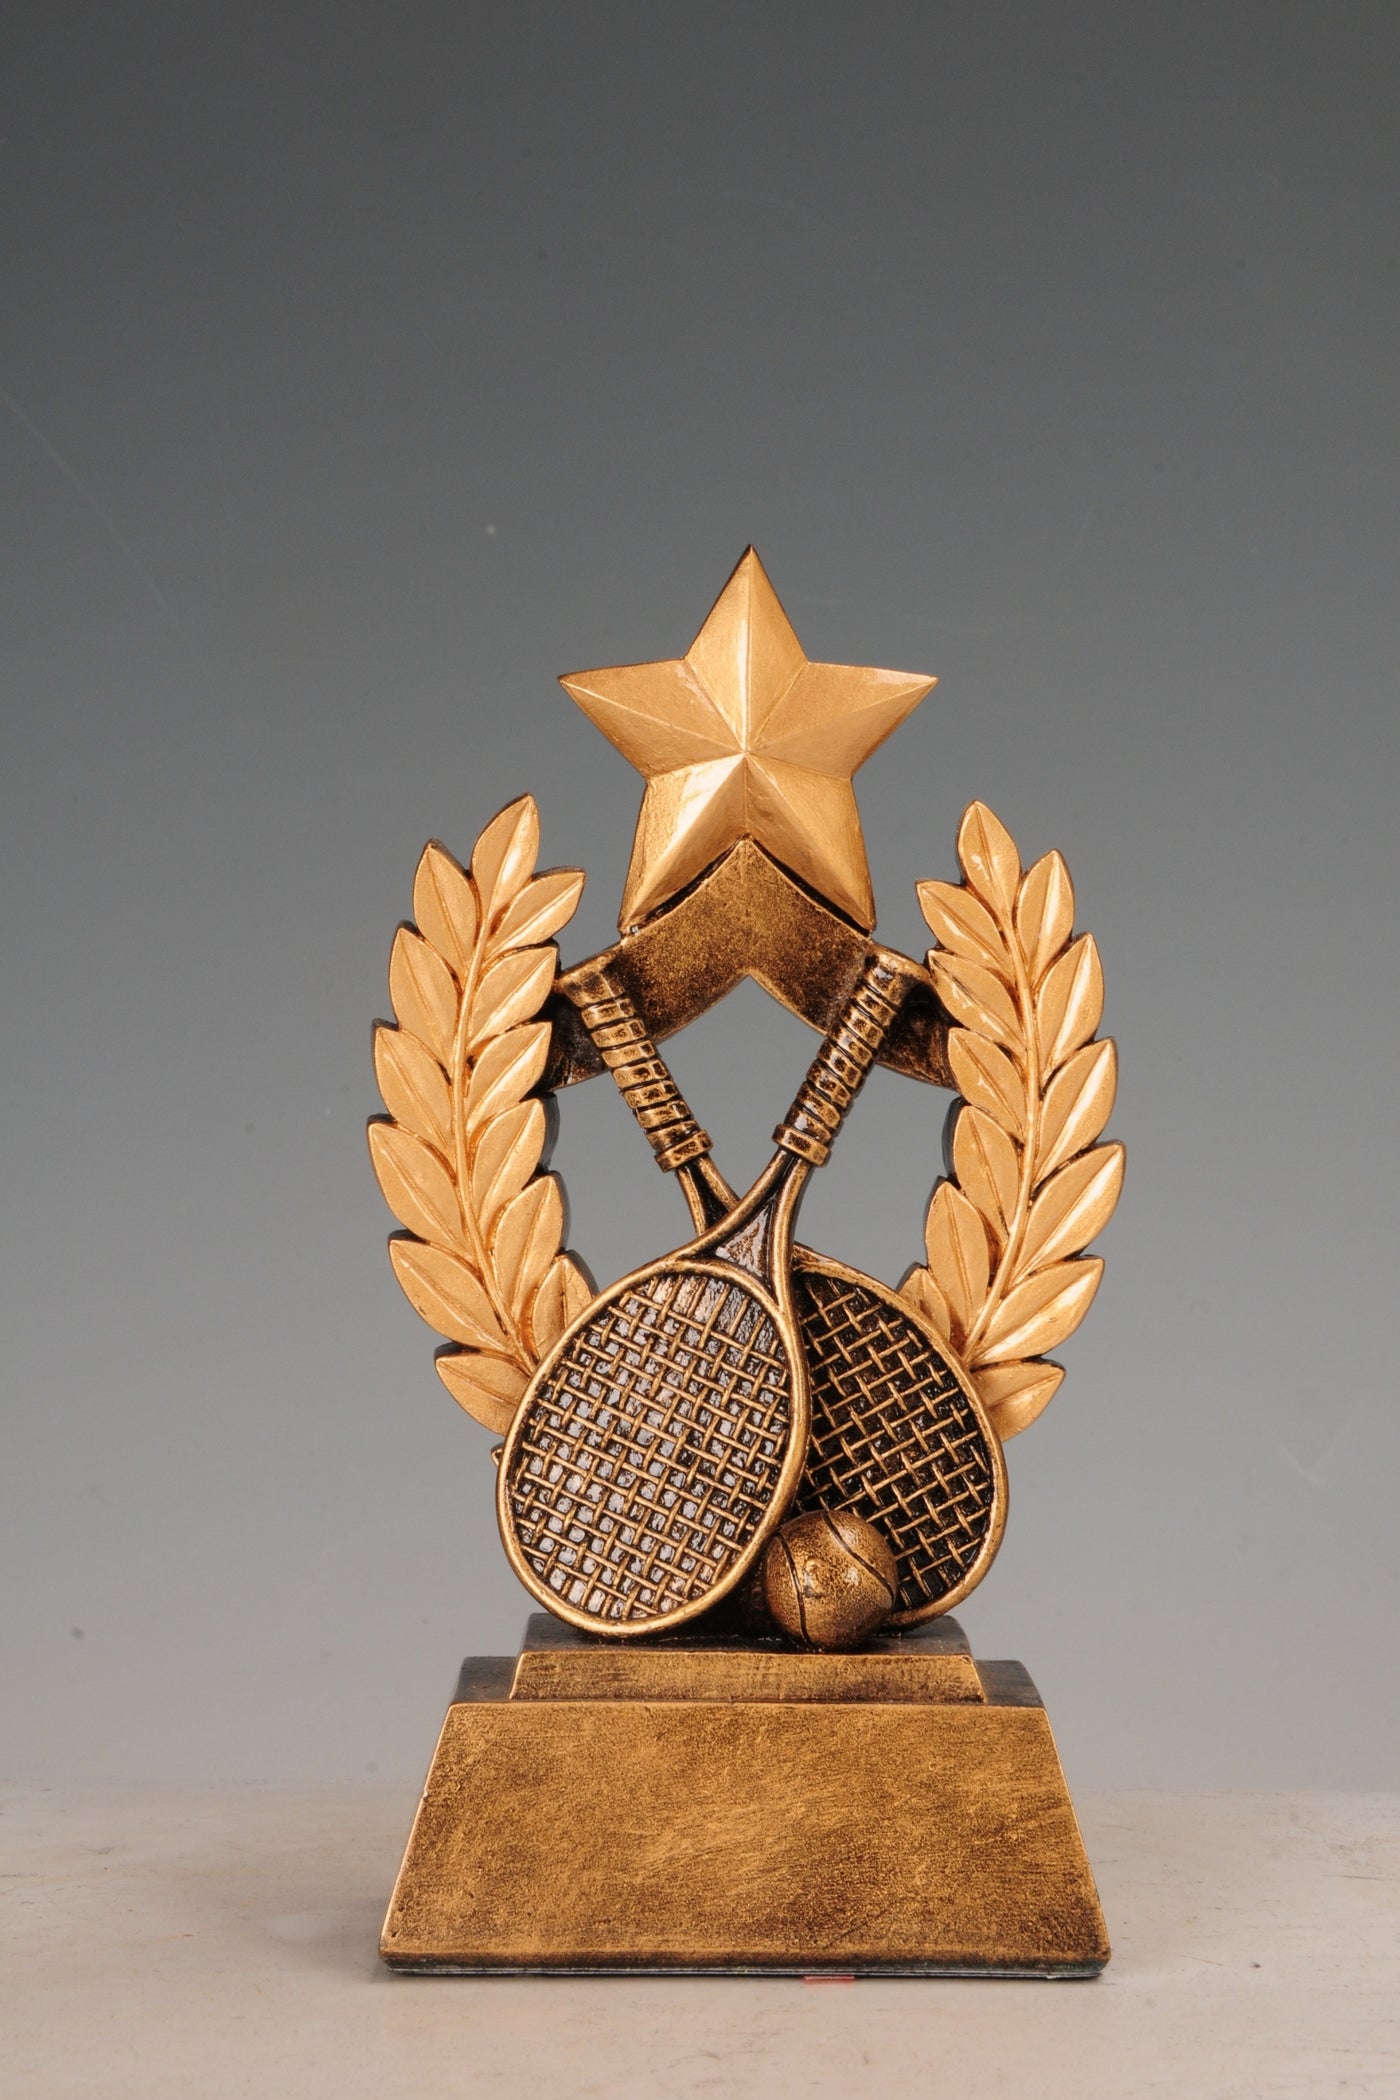 Tennis one star resin showpiece for your home or office Decor